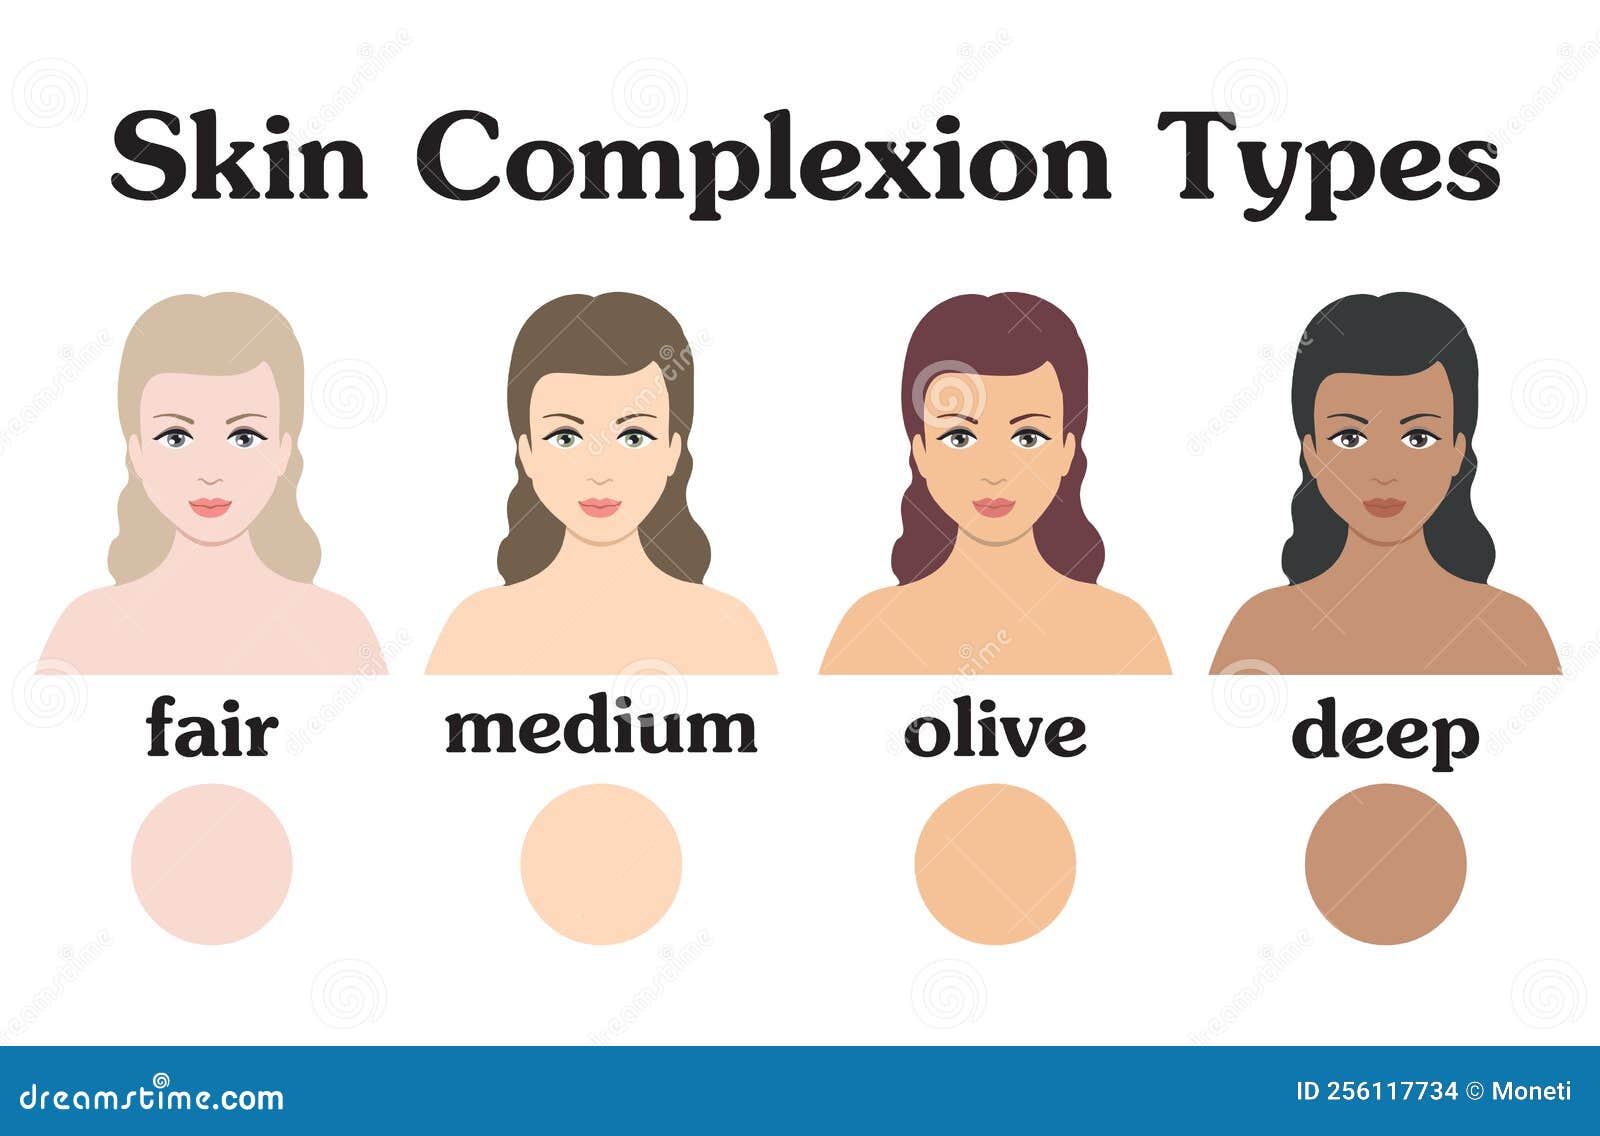 Brown Skin Complexion Chart Stock Illustrations – 27 Brown Skin Complexion  Chart Stock Illustrations, Vectors & Clipart - Dreamstime